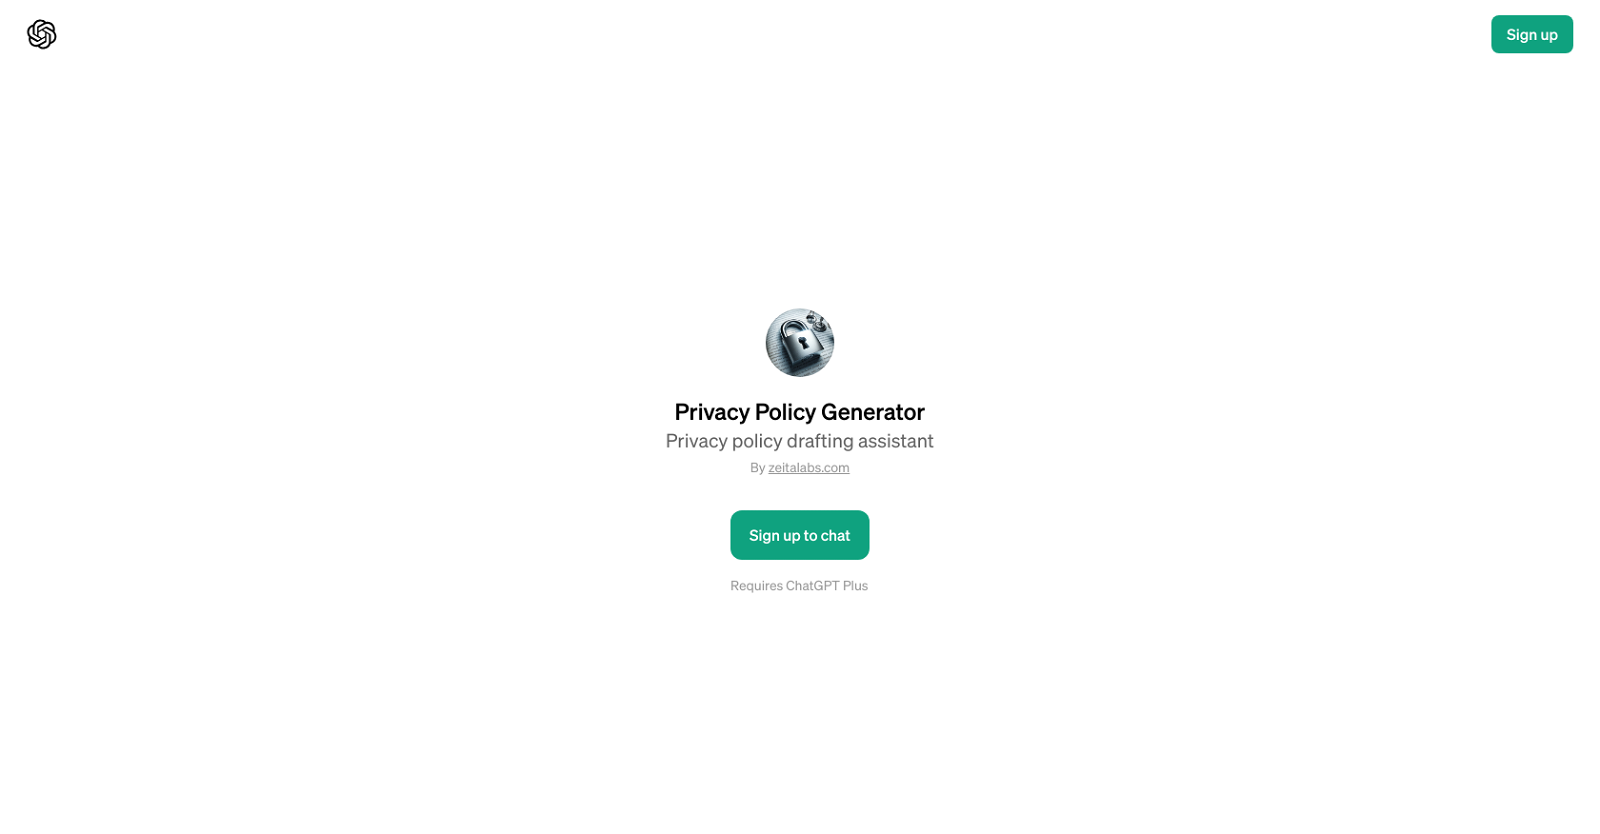 Privacy Policy Generator website